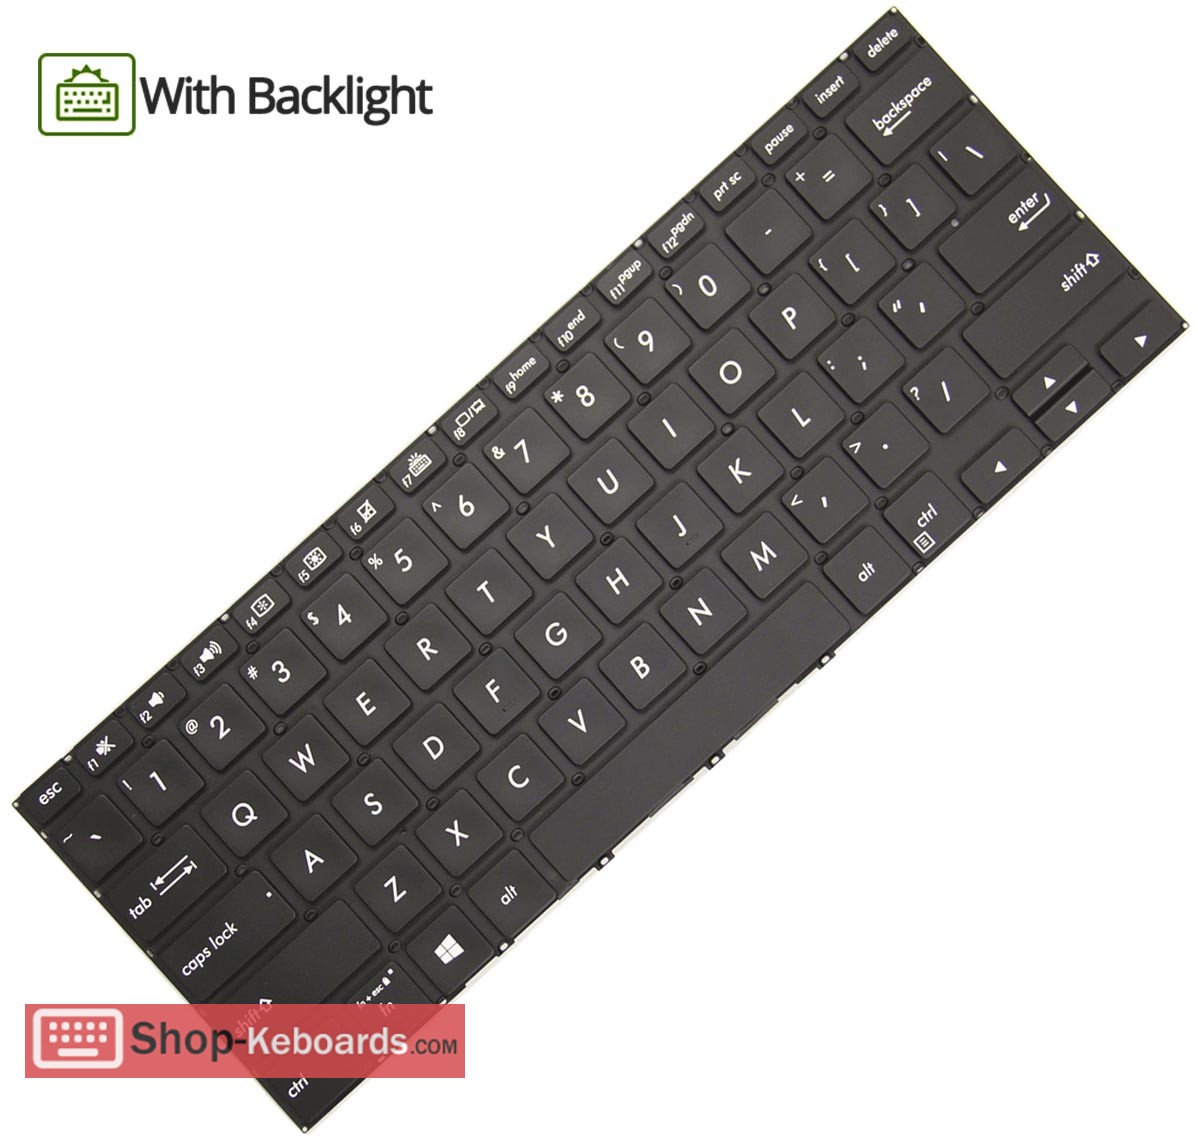 Asus 0KNB0-1626PO00 Keyboard replacement